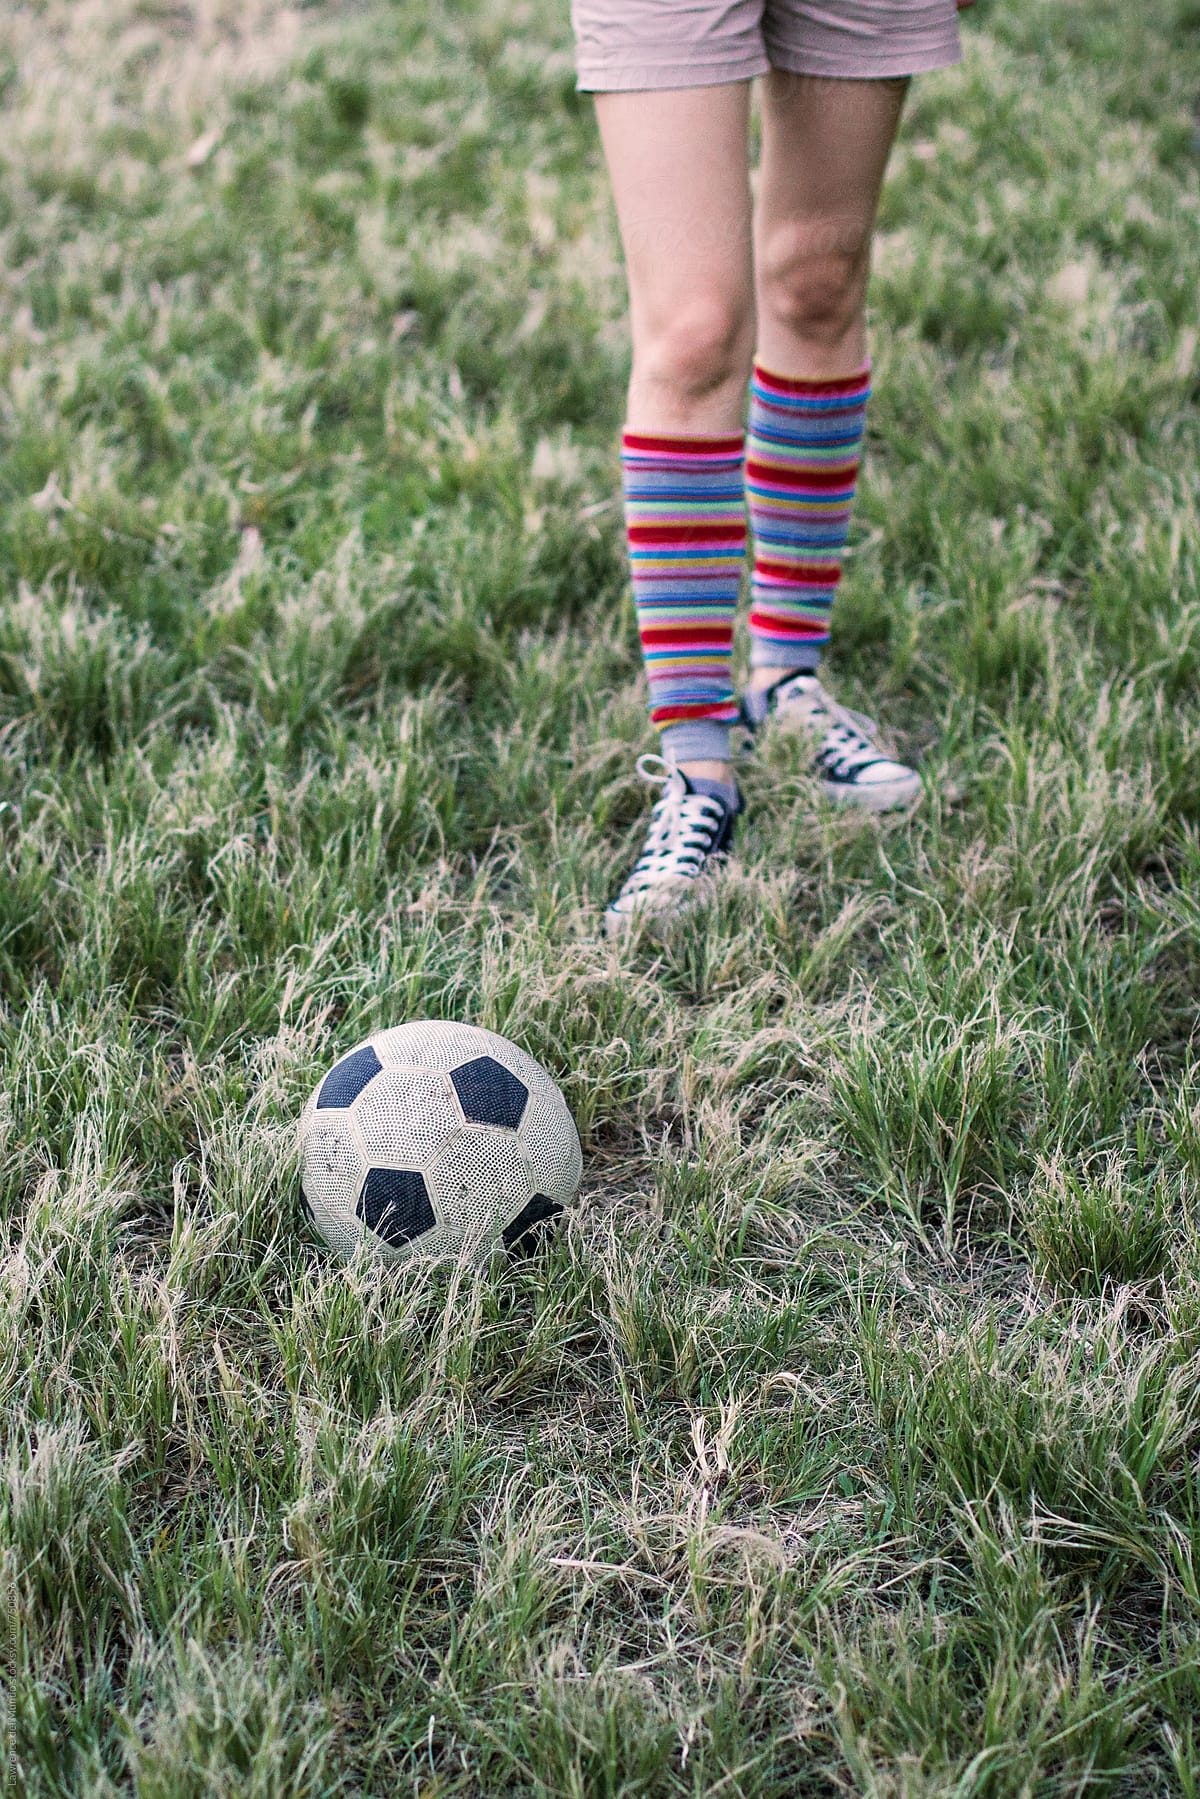 A pair of football kicking legs (with warmers) and feet on a grassy field